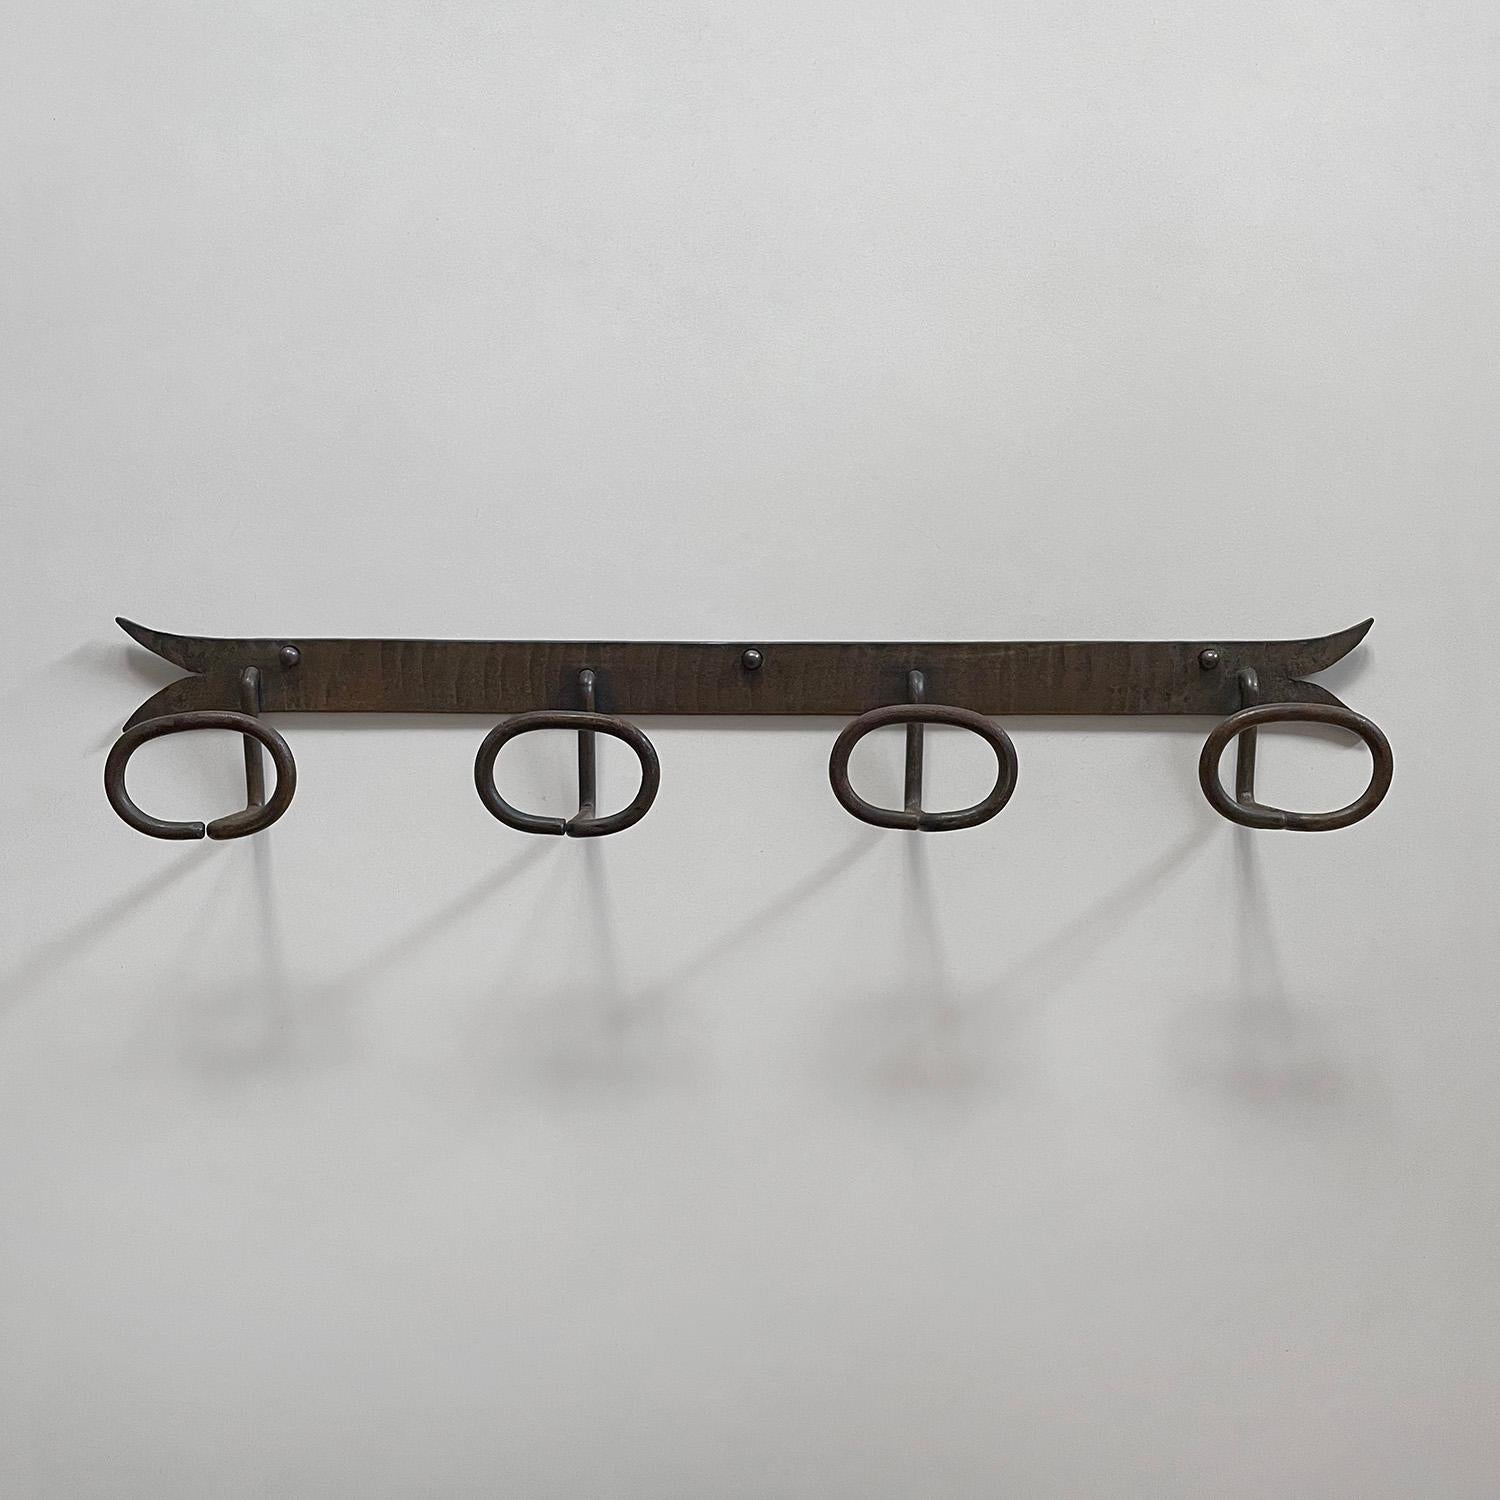 French brutalist iron coat rack.
France, circa 1940s.
Sculptural piece.
4 Hook coat rack.
Patina from age and use.